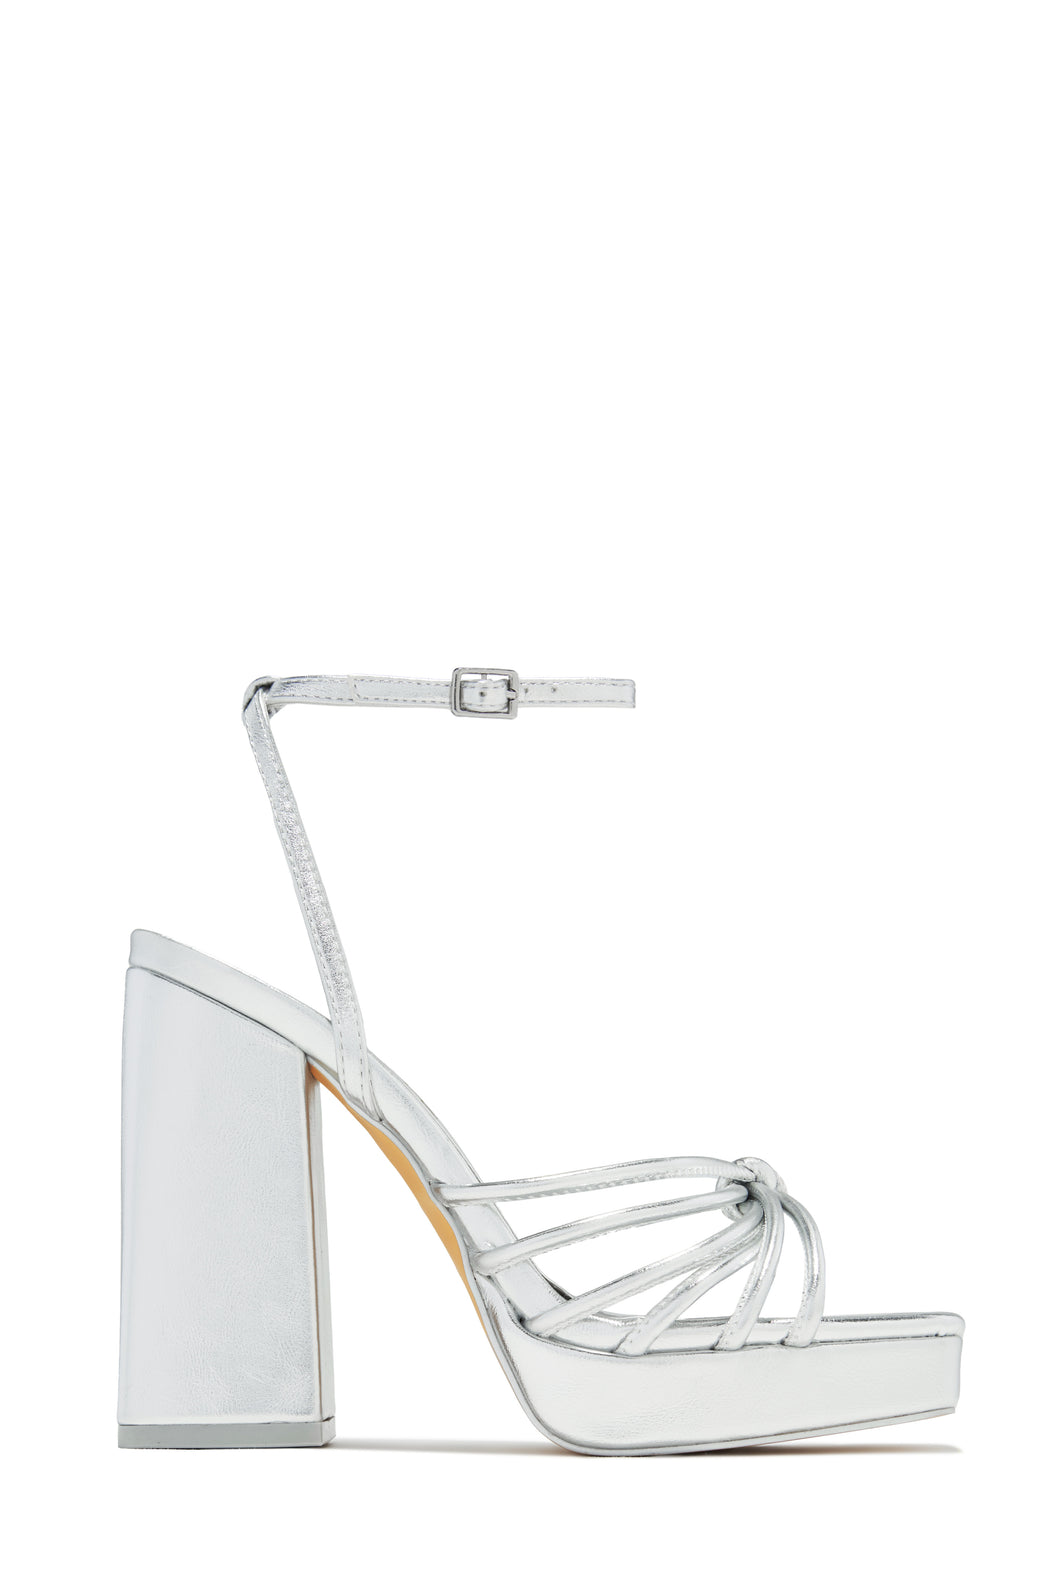 Silver-Tone Platform Block Heels with Open Square Toe